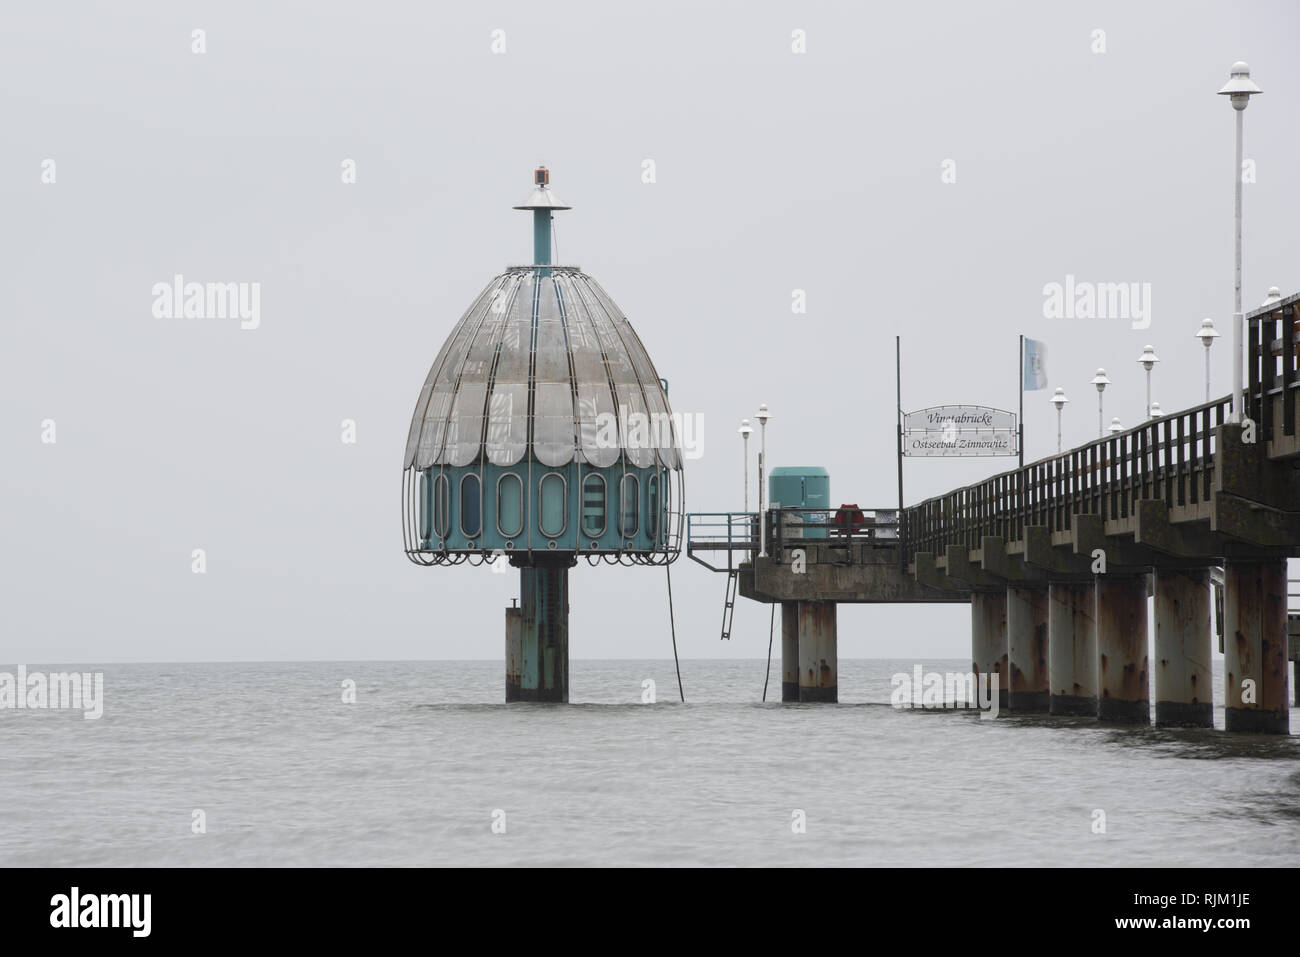 Vineta bridge Baltic Zinnowitz and diving bell on the island of Usedom - Translation of the text on the sign: 'Vineta bridge' 'Baltic Sea bath Zinnowi Stock Photo